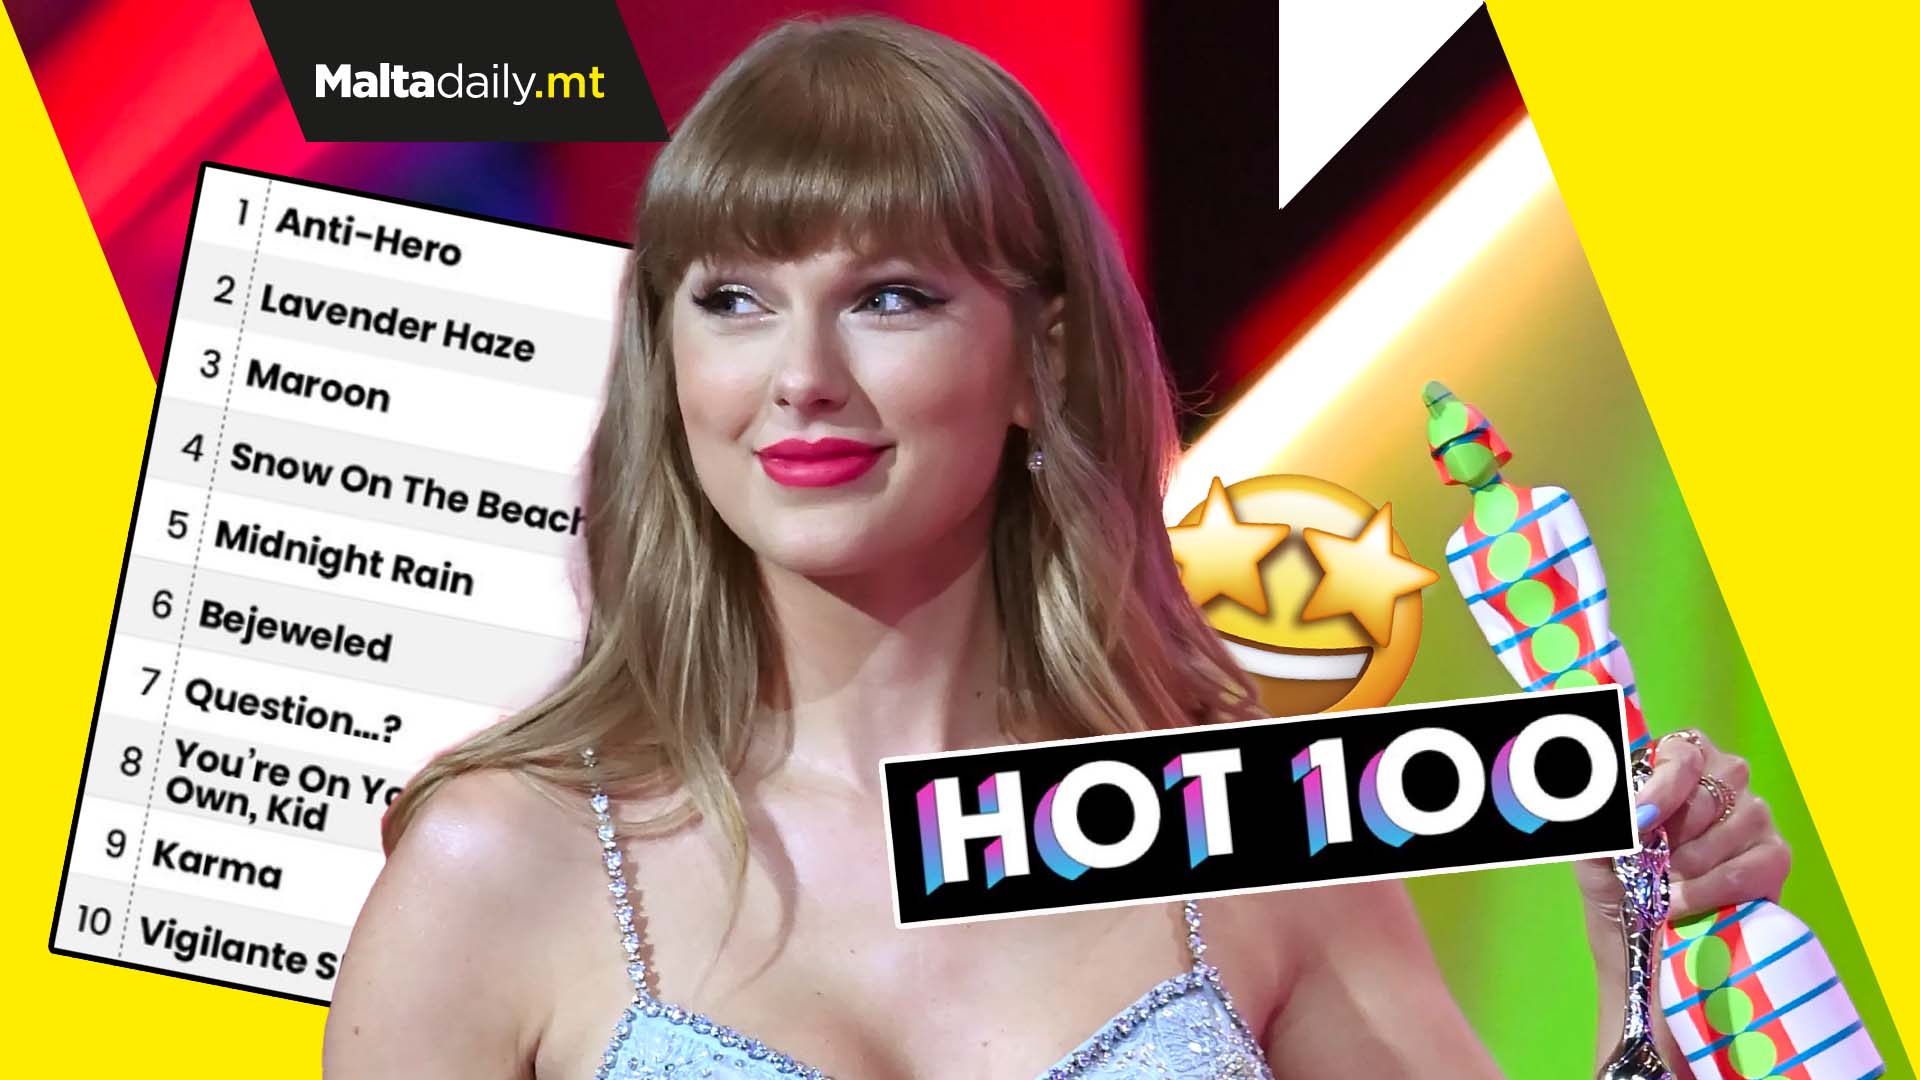 Taylor Swift first musician to fill Top 10 on Billboard Hot 100